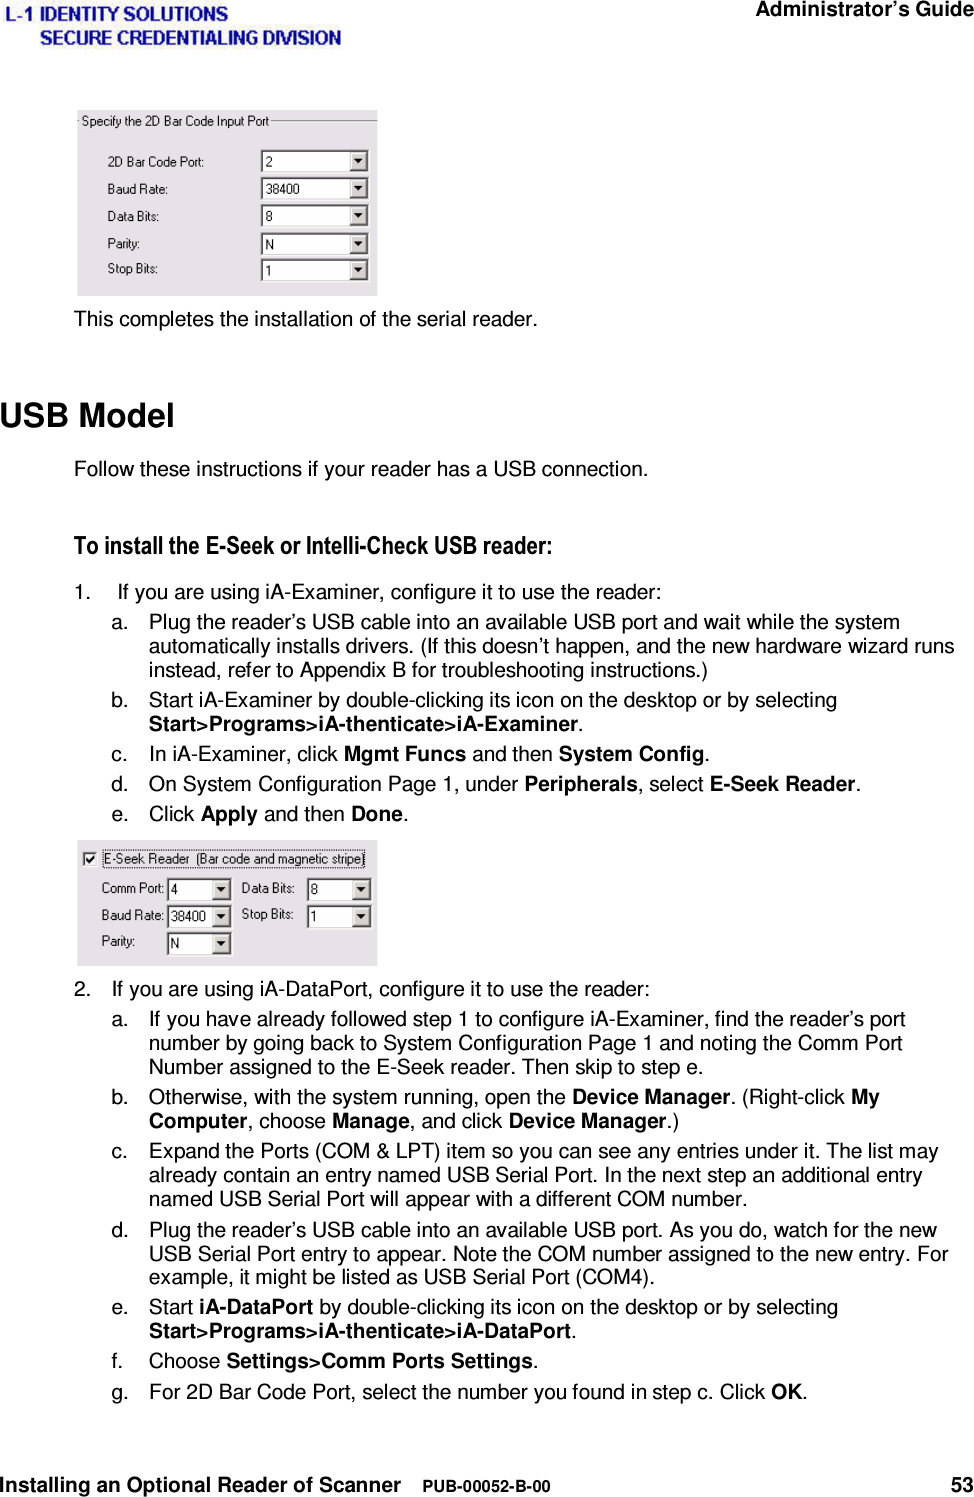   Administrator’s Guide Installing an Optional Reader of Scanner  PUB-00052-B-00 53  This completes the installation of the serial reader. USB Model Follow these instructions if your reader has a USB connection. 7RLQVWDOOWKH(6HHNRU,QWHOOL&amp;KHFN86%UHDGHU1.   If you are using iA-Examiner, configure it to use the reader: a.  Plug the reader’s USB cable into an available USB port and wait while the system automatically installs drivers. (If this doesn’t happen, and the new hardware wizard runs instead, refer to Appendix B for troubleshooting instructions.) b.  Start iA-Examiner by double-clicking its icon on the desktop or by selecting Start&gt;Programs&gt;iA-thenticate&gt;iA-Examiner. c.  In iA-Examiner, click Mgmt Funcs and then System Config. d.  On System Configuration Page 1, under Peripherals, select E-Seek Reader. e. Click Apply and then Done.  2.  If you are using iA-DataPort, configure it to use the reader: a.  If you have already followed step 1 to configure iA-Examiner, find the reader’s port number by going back to System Configuration Page 1 and noting the Comm Port Number assigned to the E-Seek reader. Then skip to step e. b.  Otherwise, with the system running, open the Device Manager. (Right-click My Computer, choose Manage, and click Device Manager.) c.  Expand the Ports (COM &amp; LPT) item so you can see any entries under it. The list may already contain an entry named USB Serial Port. In the next step an additional entry named USB Serial Port will appear with a different COM number. d.  Plug the reader’s USB cable into an available USB port. As you do, watch for the new USB Serial Port entry to appear. Note the COM number assigned to the new entry. For example, it might be listed as USB Serial Port (COM4). e. Start iA-DataPort by double-clicking its icon on the desktop or by selecting Start&gt;Programs&gt;iA-thenticate&gt;iA-DataPort. f. Choose Settings&gt;Comm Ports Settings. g.  For 2D Bar Code Port, select the number you found in step c. Click OK. 